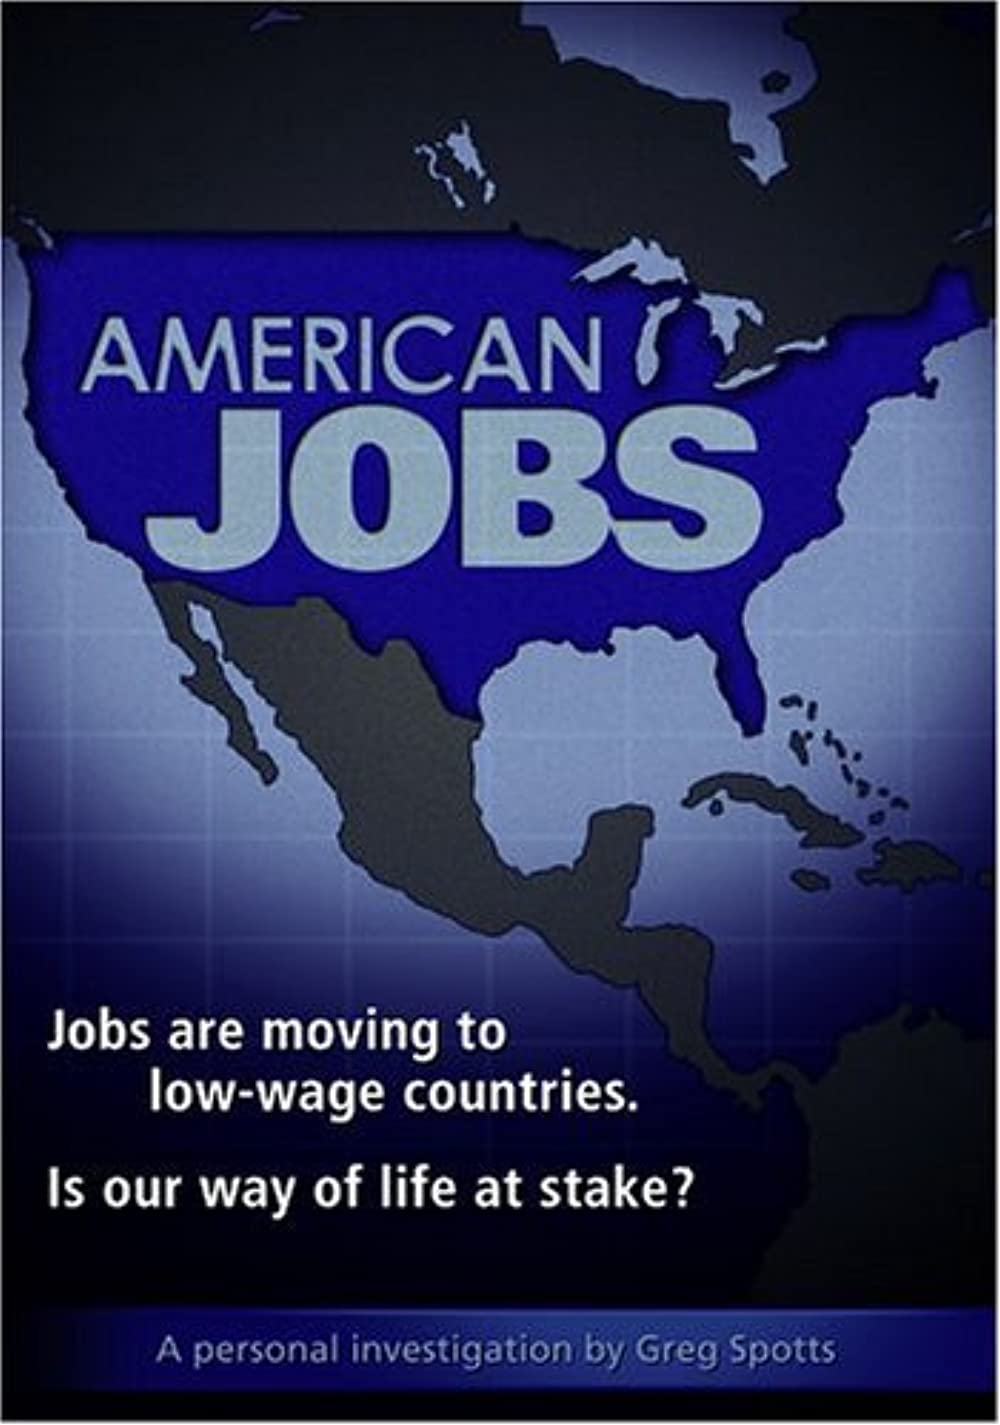 A German solution to an American jobs problem?